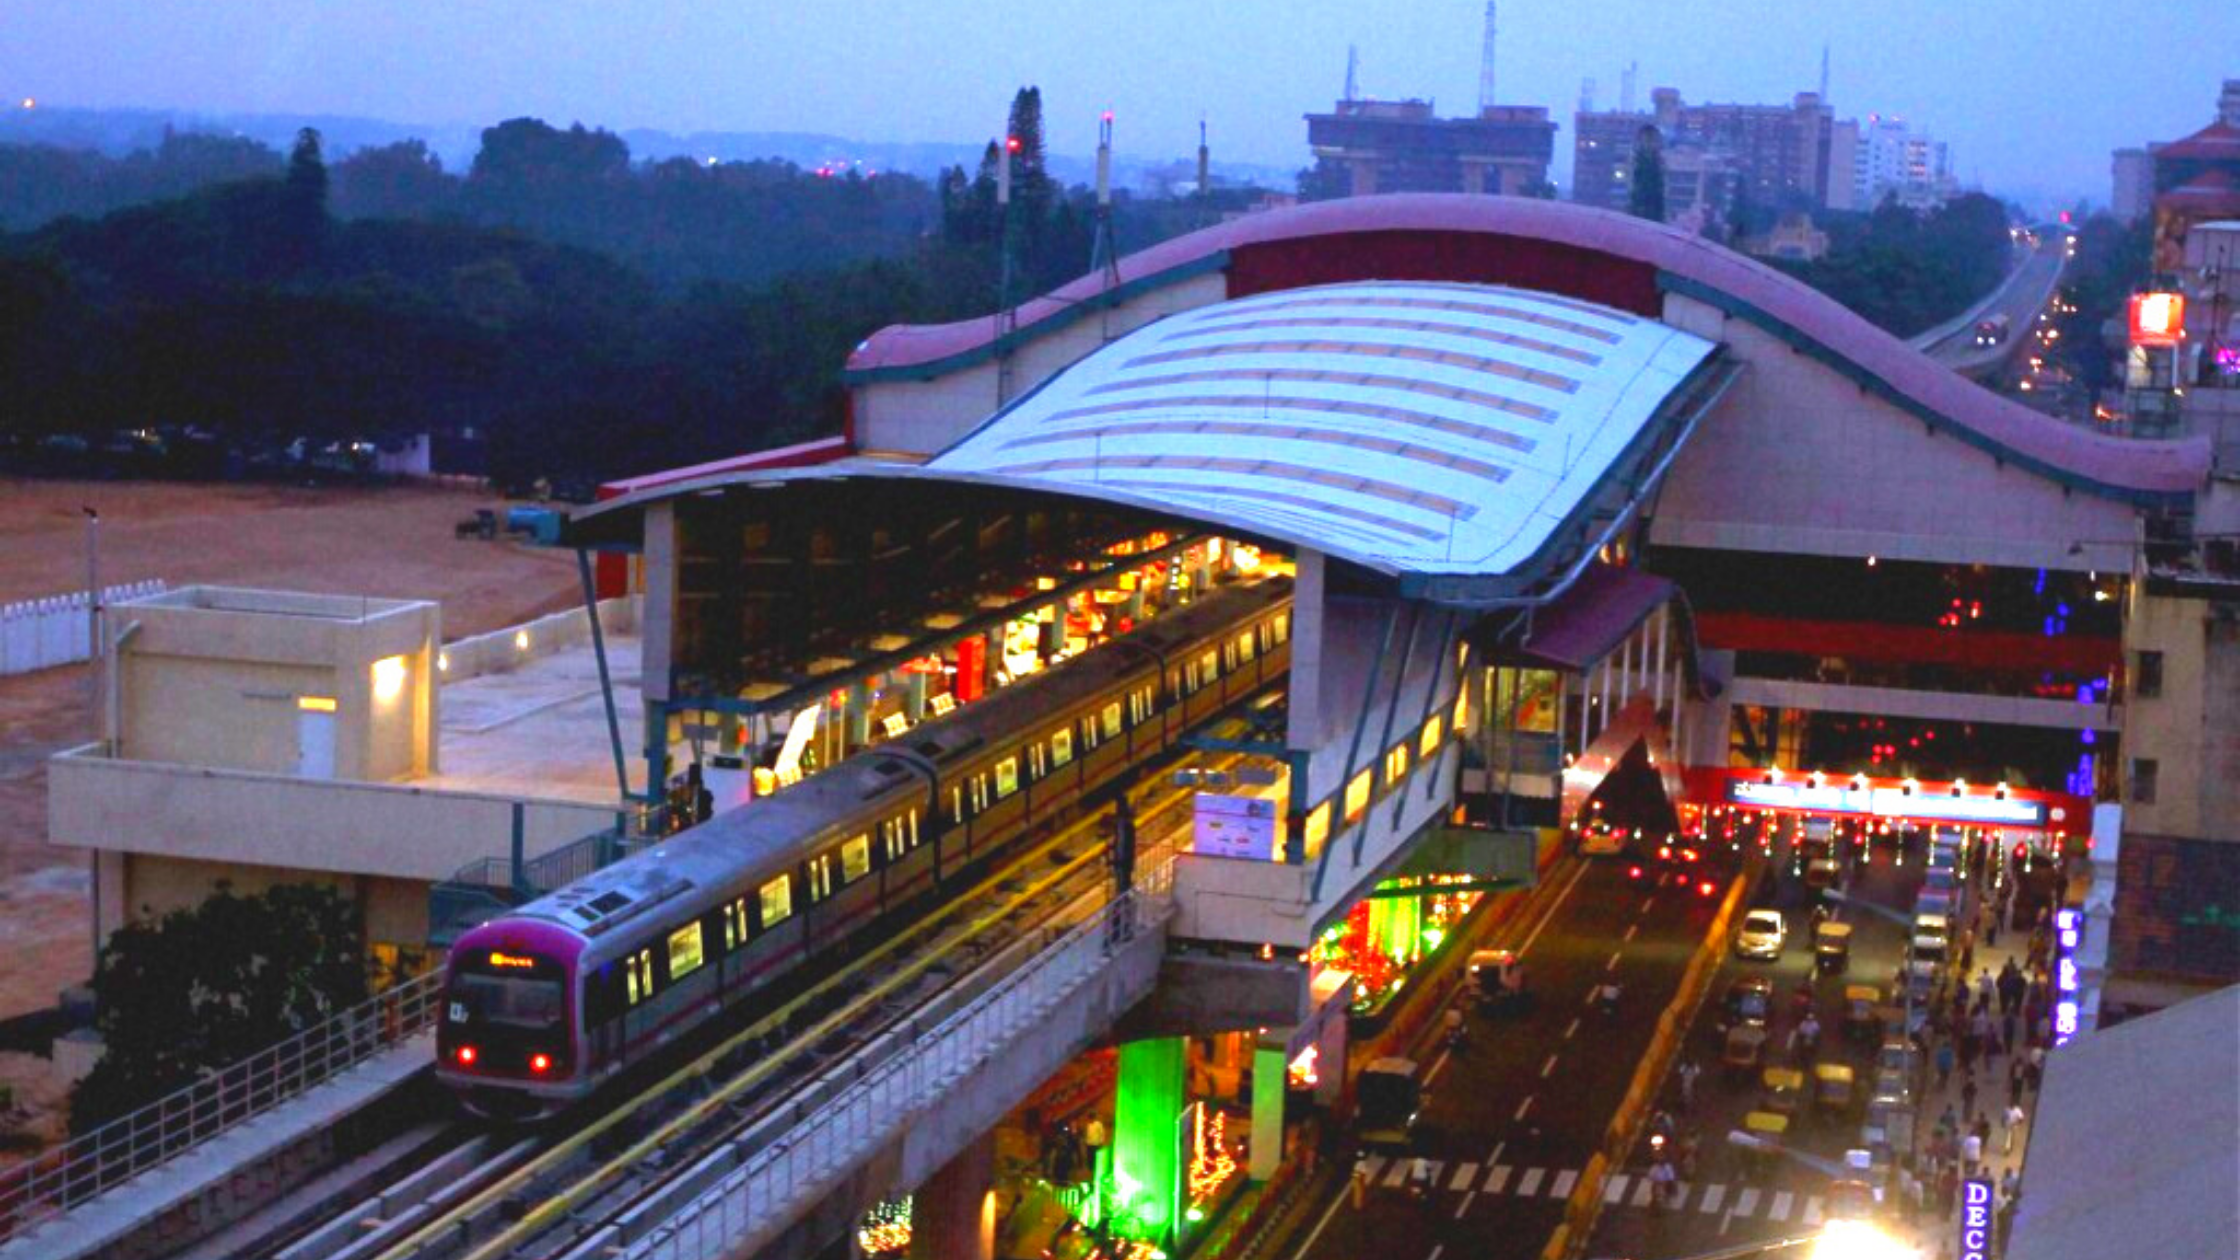 Why choose homes near Metro stations